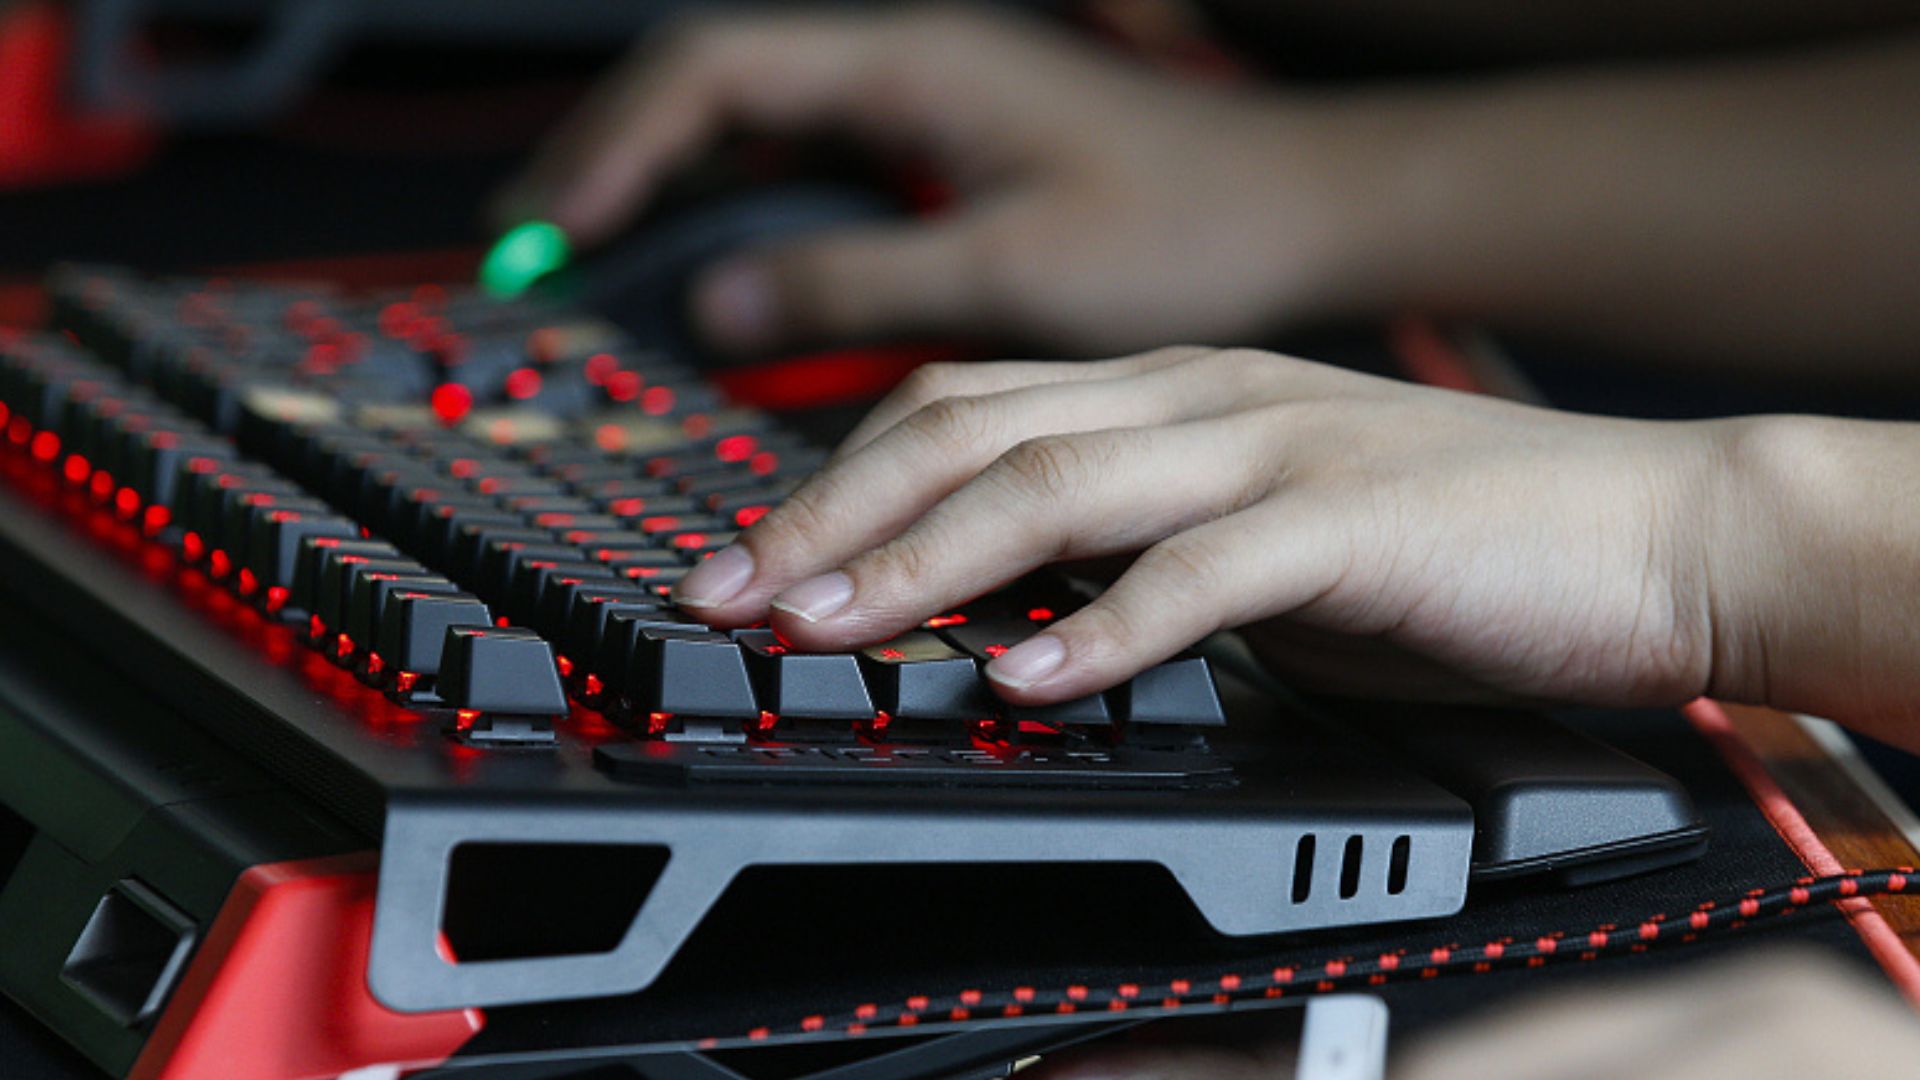 Data suggests nearly half of China's population plays online games / CFP